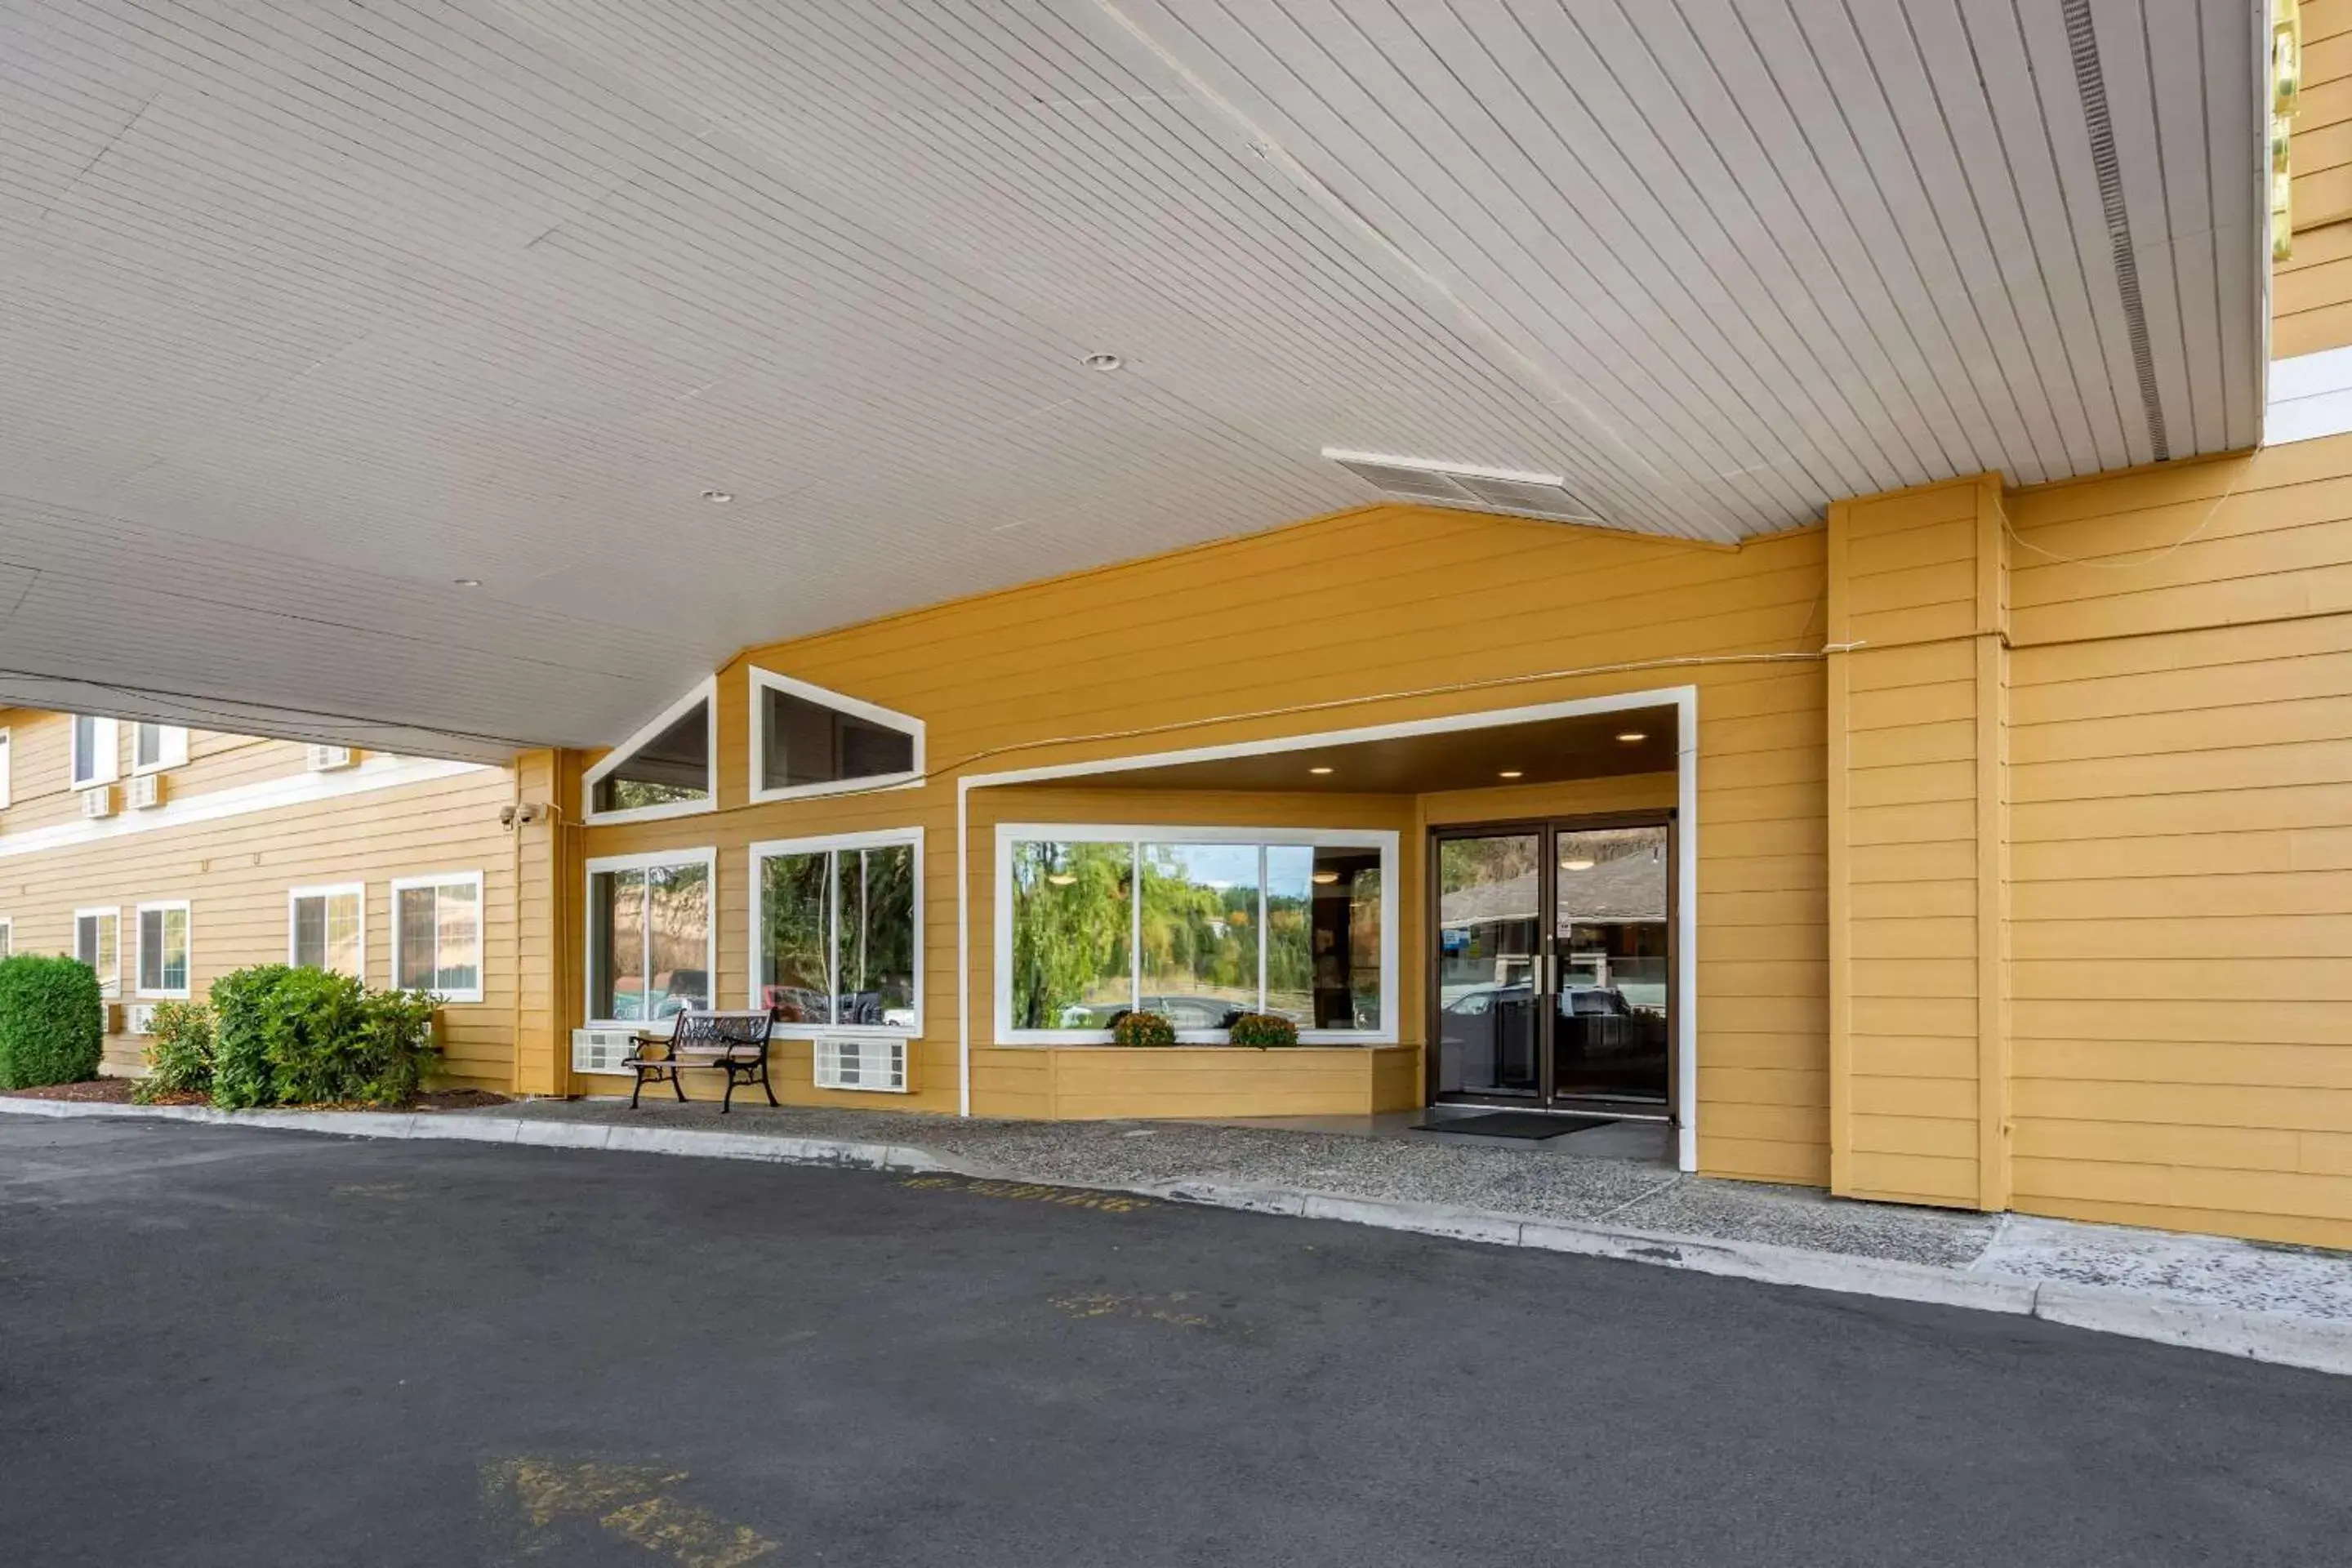 Property building in Quality Inn Paradise Creek